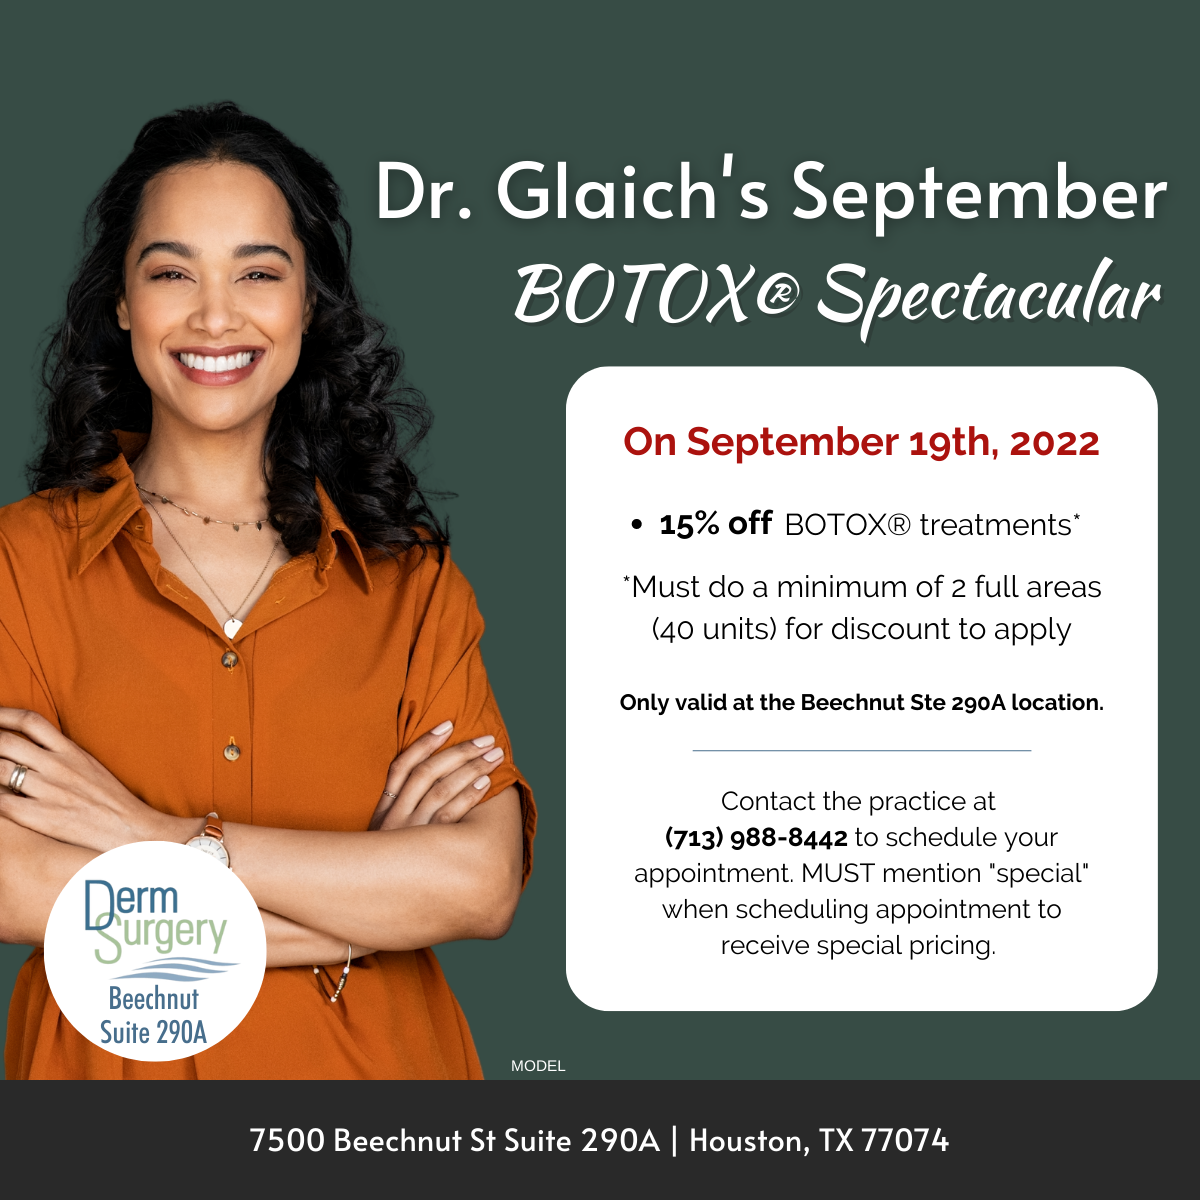 Dr. Glaich's September BOTOX® Spectacular